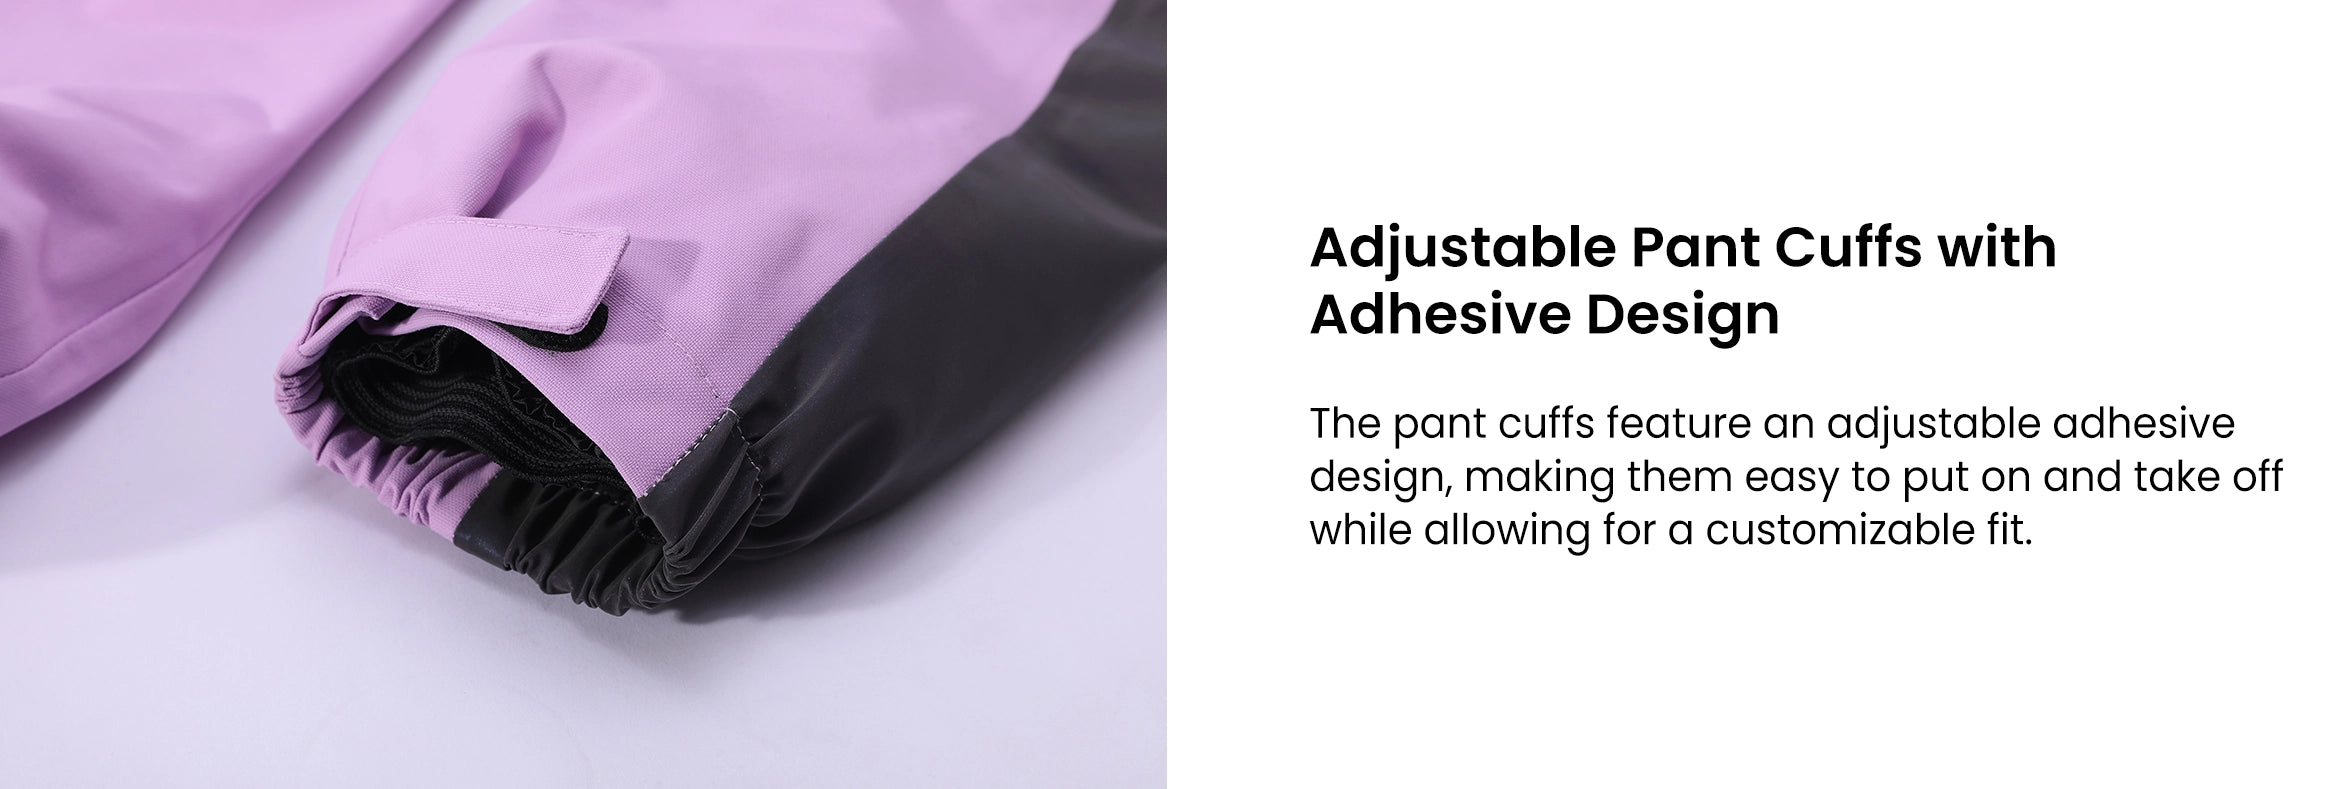 12. Adjustable Pant Cuffs with Adhesive Design